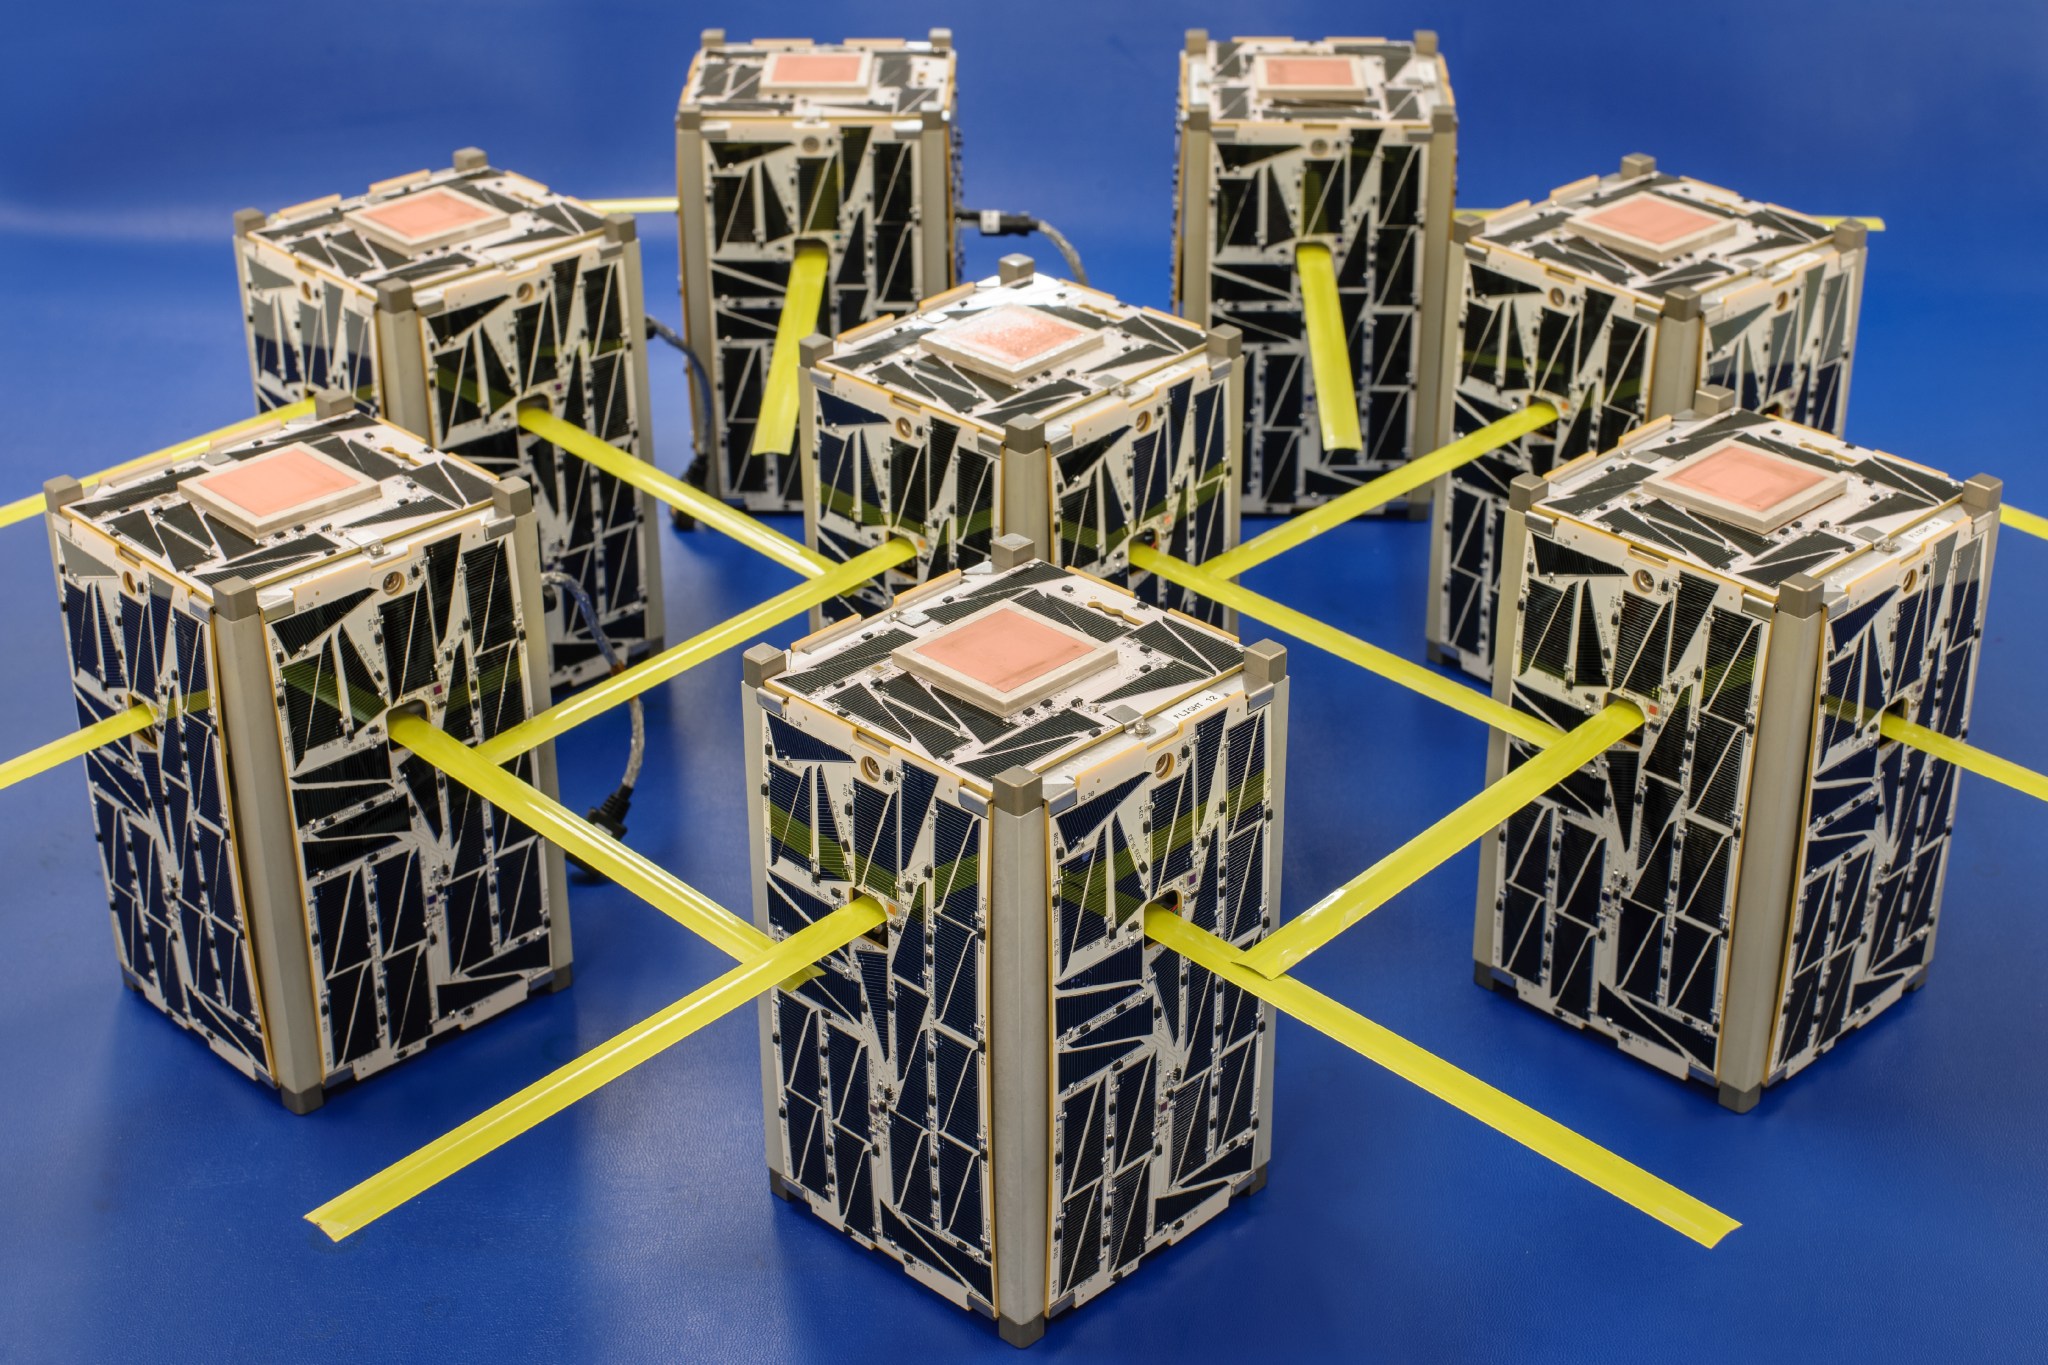 Edison of Demonstration of Small Sat Networks_CubeSats